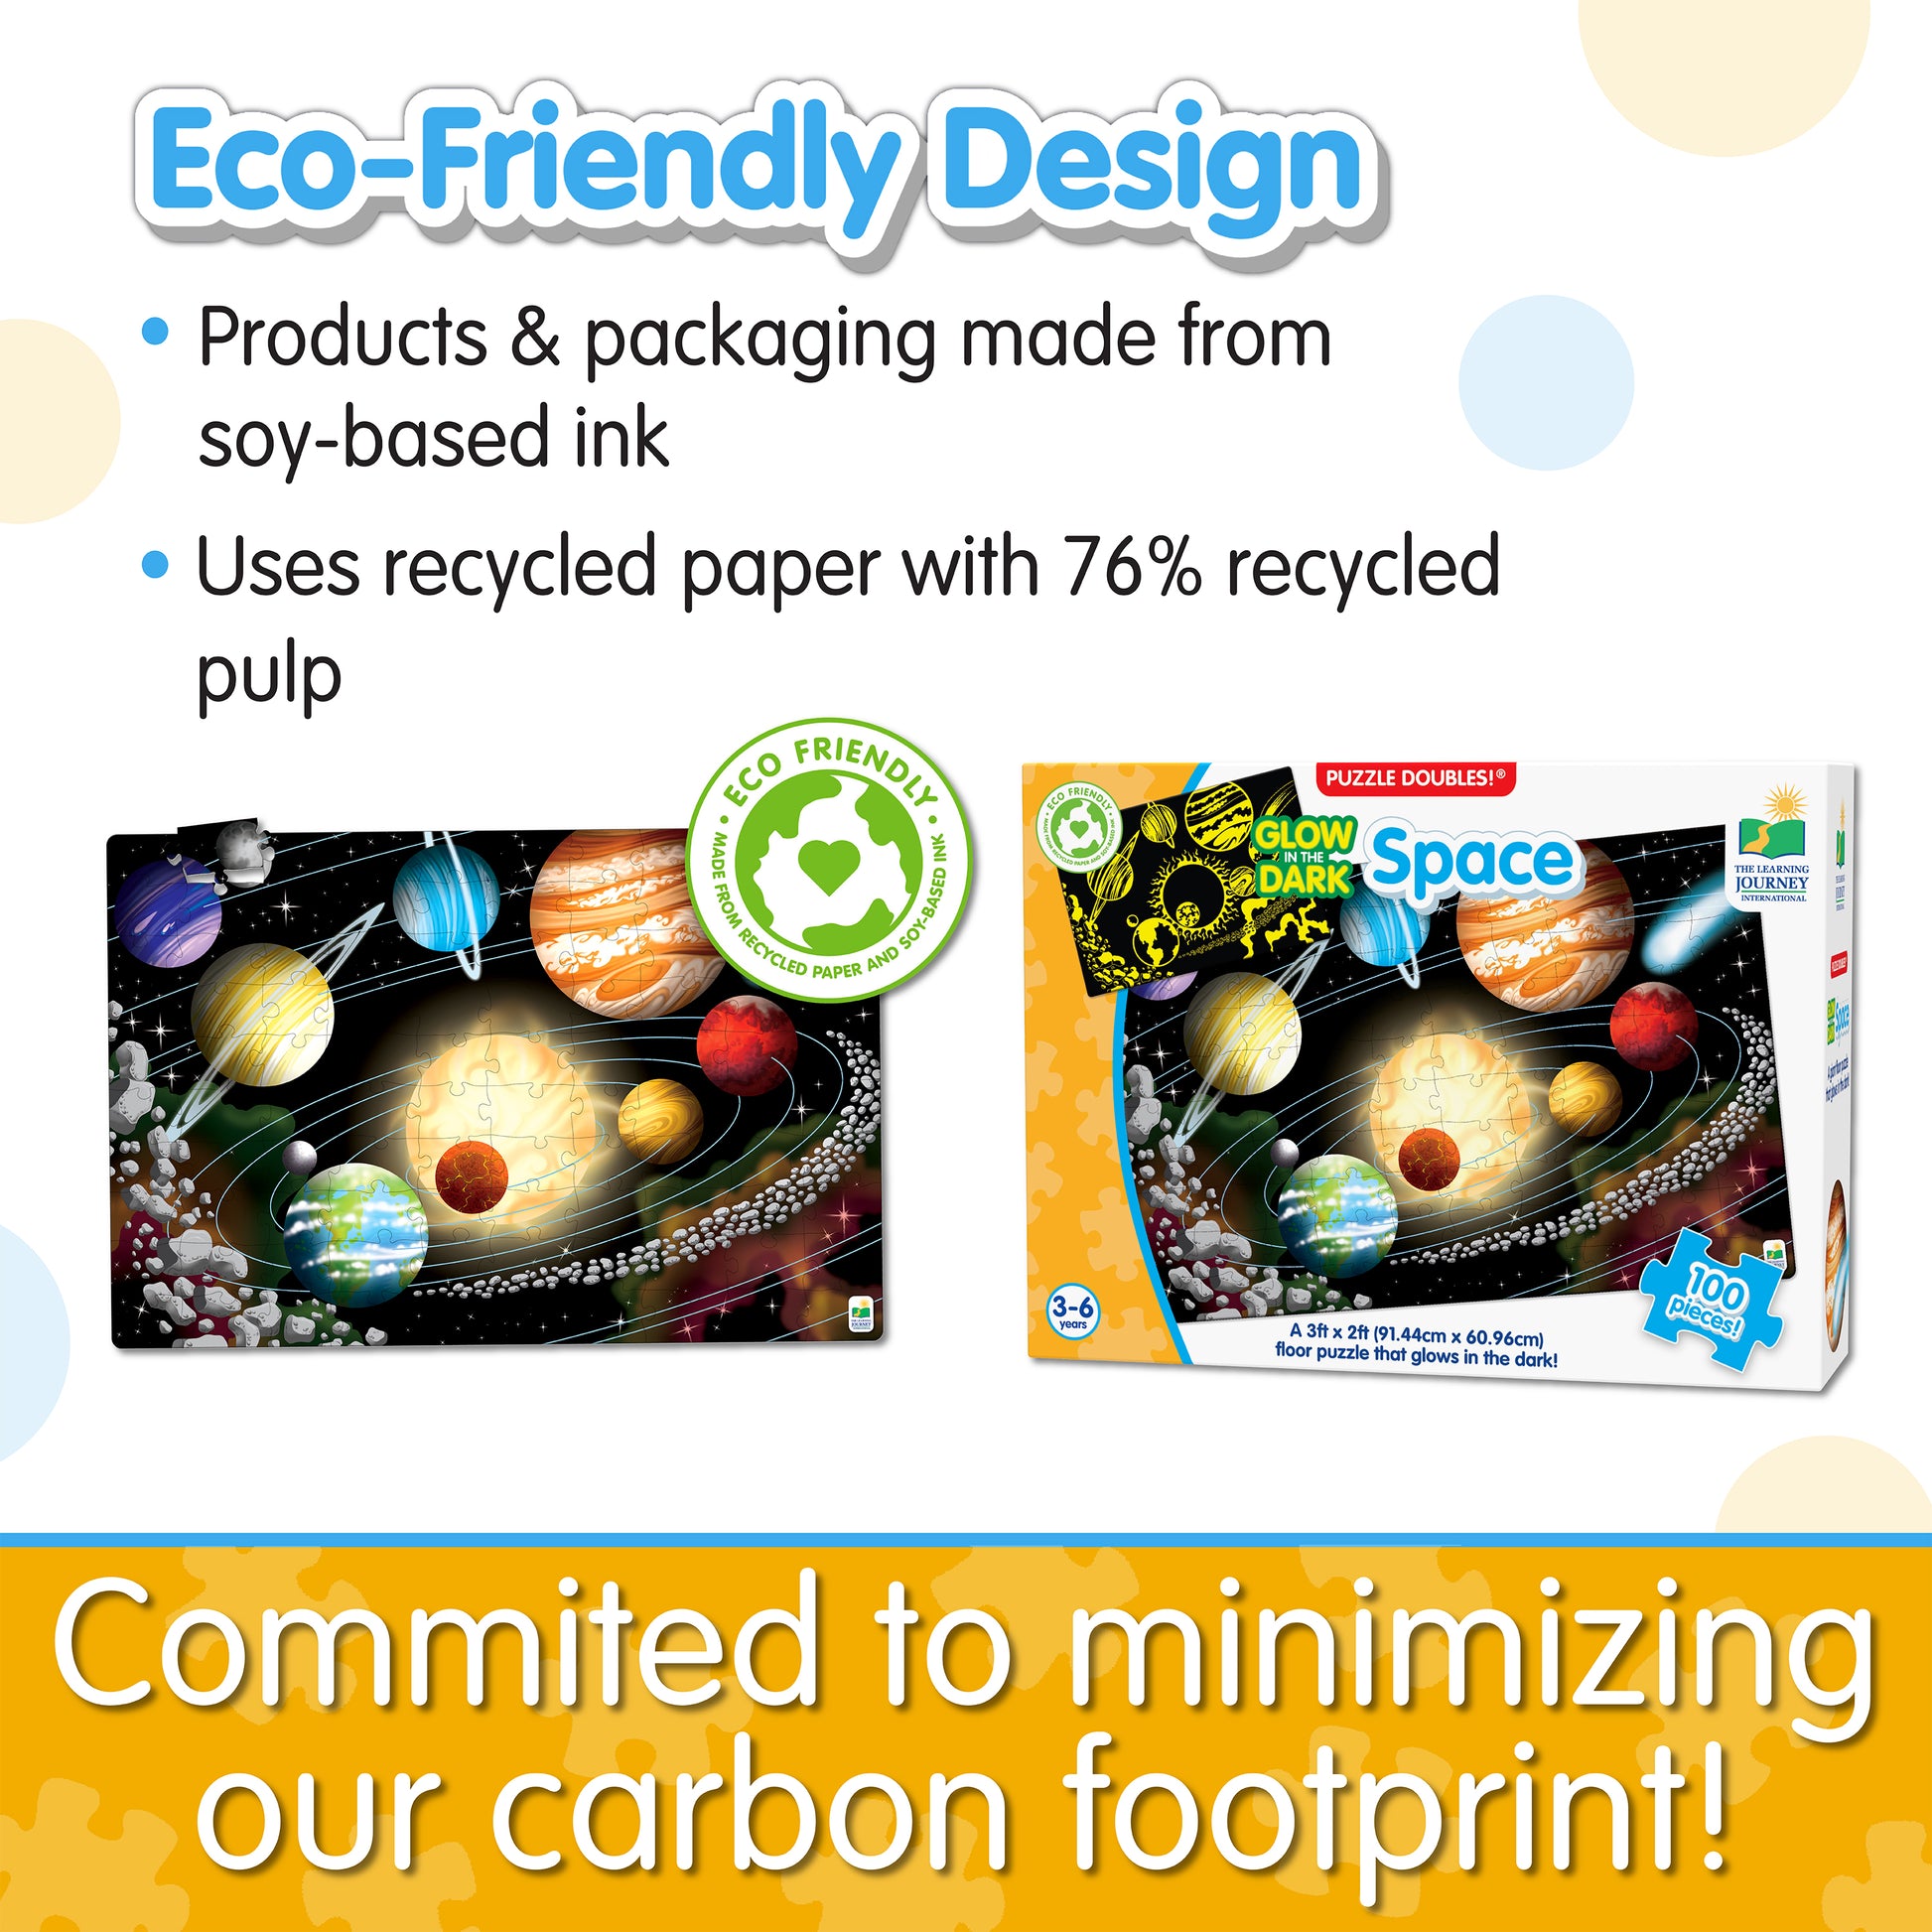 Infographic about Glow in the Dark - Space's eco-friendly design that says, "Committed to minimizing our carbon footprint!"